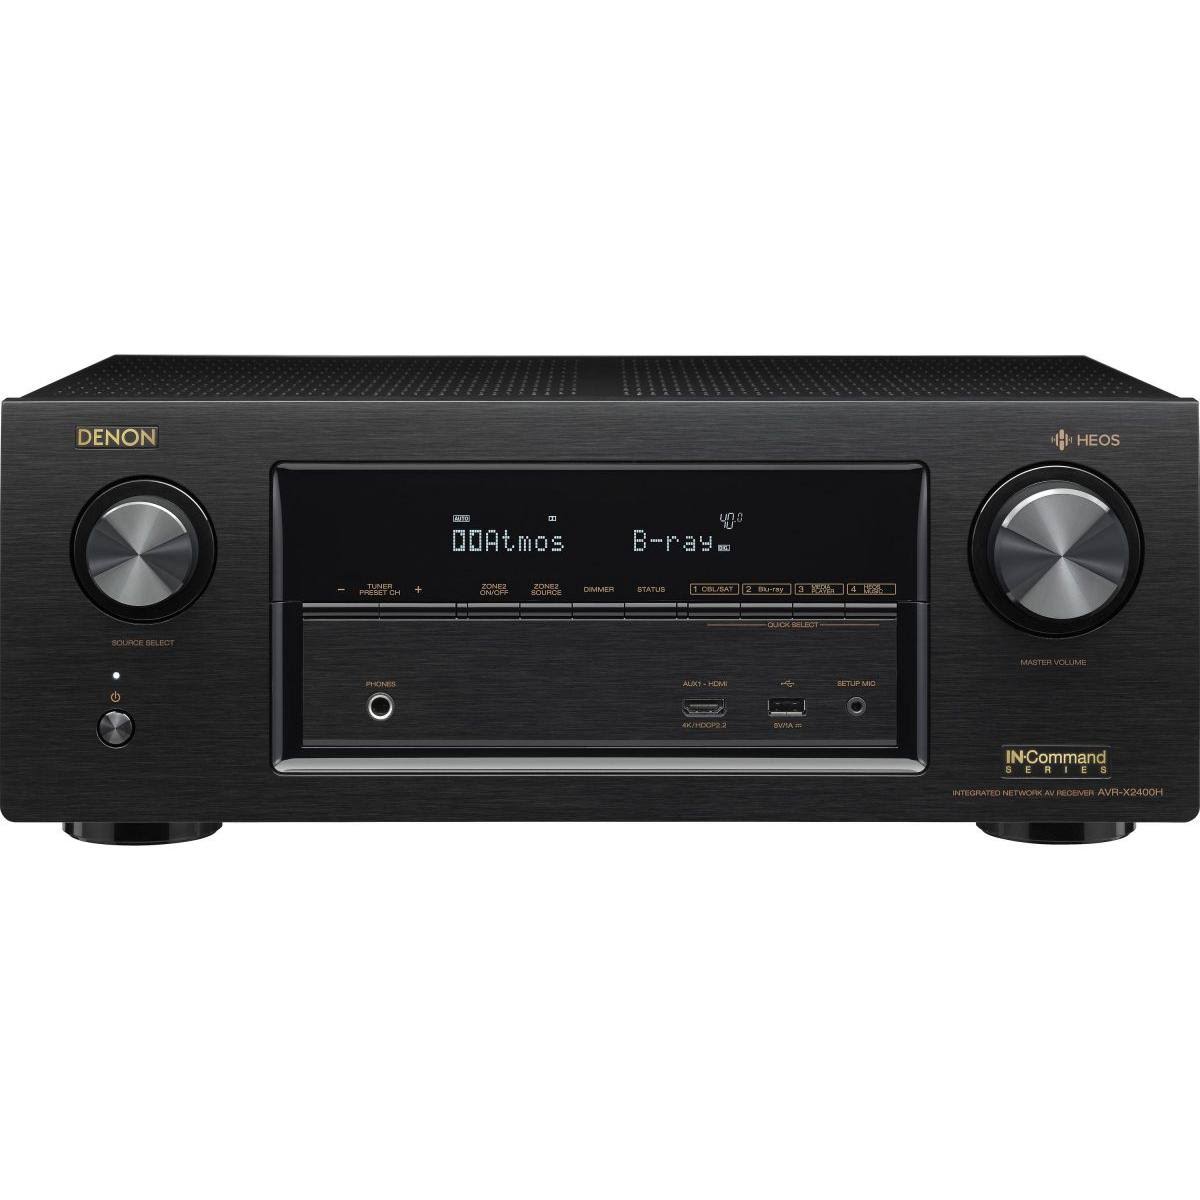 Denon AVRX2400H 7.2 Channel AV Receiver with Built-in HEOS wireless technology